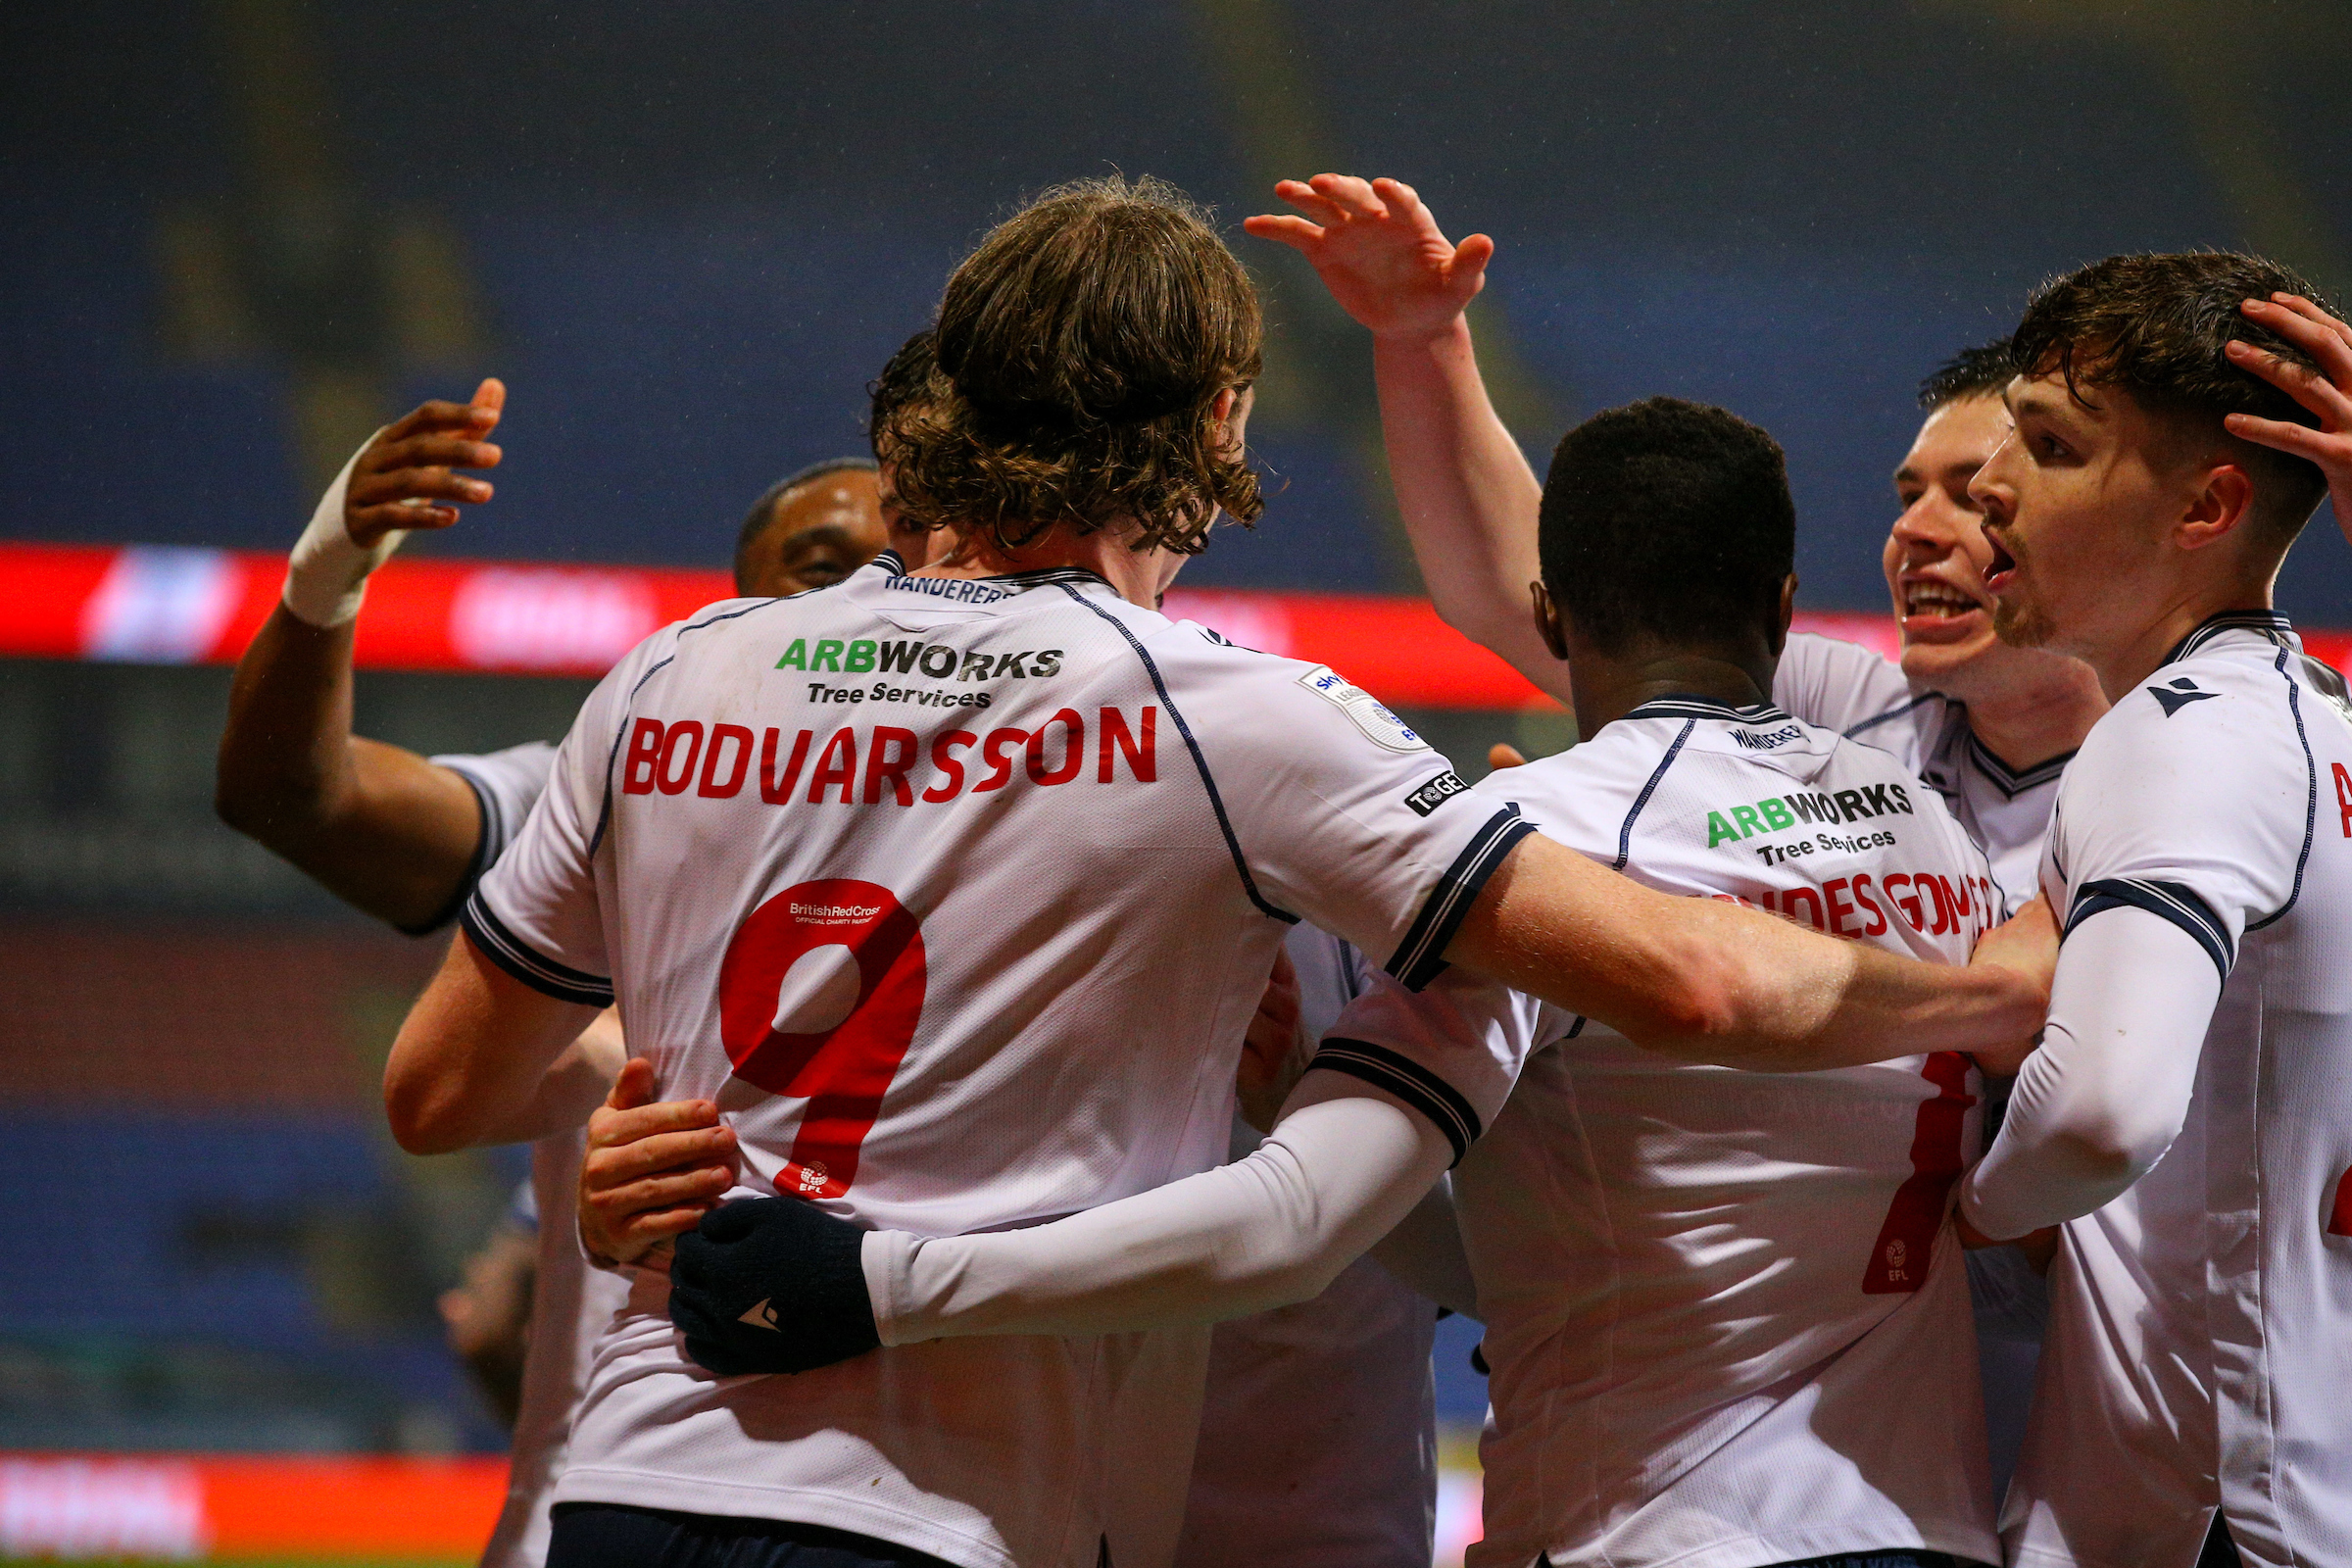 Bodvarsson: Bolton Wanderers must keep showing 'resilience'